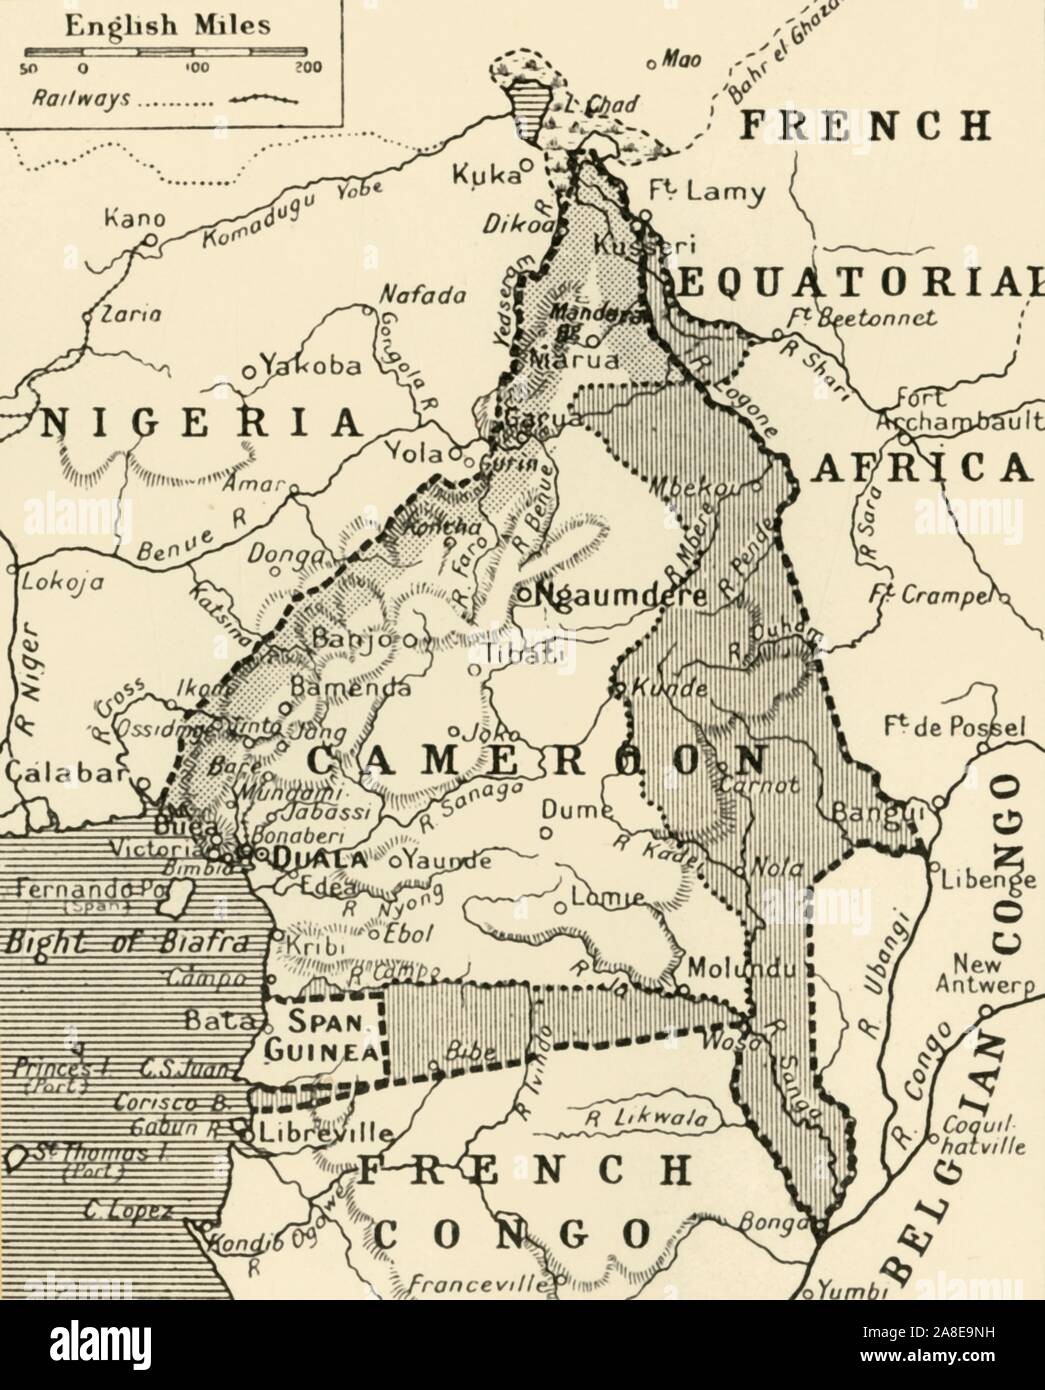 'Map Showing the German Cameroon Colony', 1916. German Cameroon was an African colony of the German Empire from 1884 to 1916. Following Germany's defeat, the Treaty of Versailles divided the territory between Great Britain and France. From &quot;The War Illustrated Album De Luxe - Volume IV. The Summer Campaign - 1915&quot;, edited by J. A. Hammerton. [The Amalgamated Press, Limited, London, 1916] Stock Photo